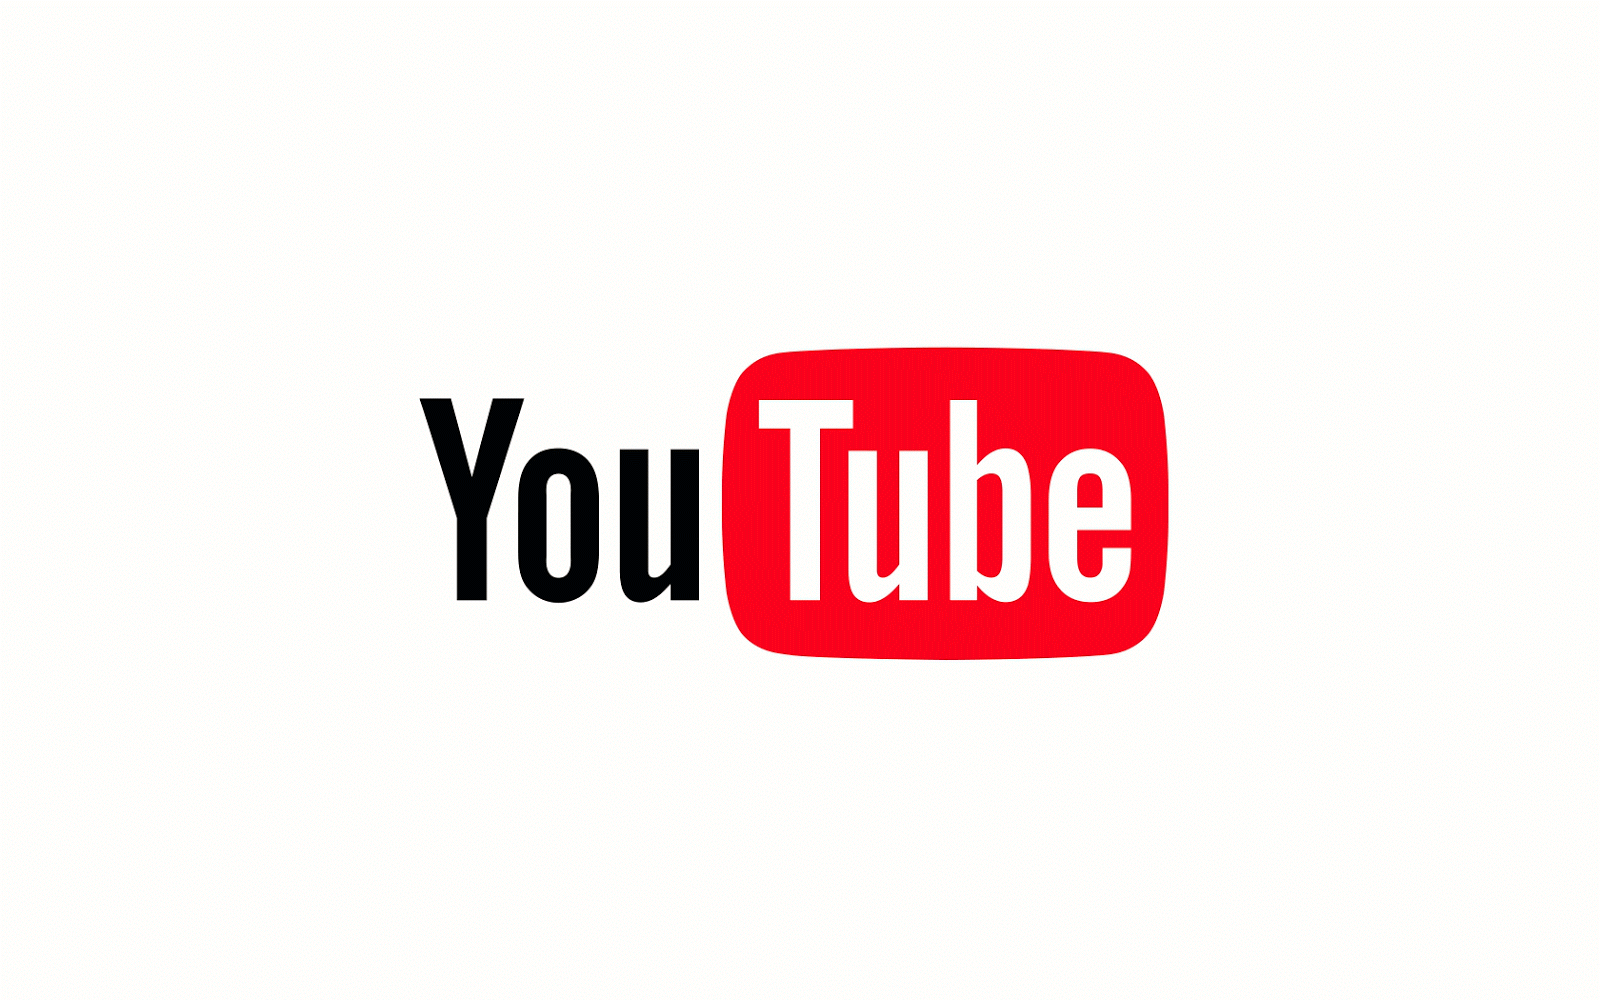 A new YouTube look that works for you